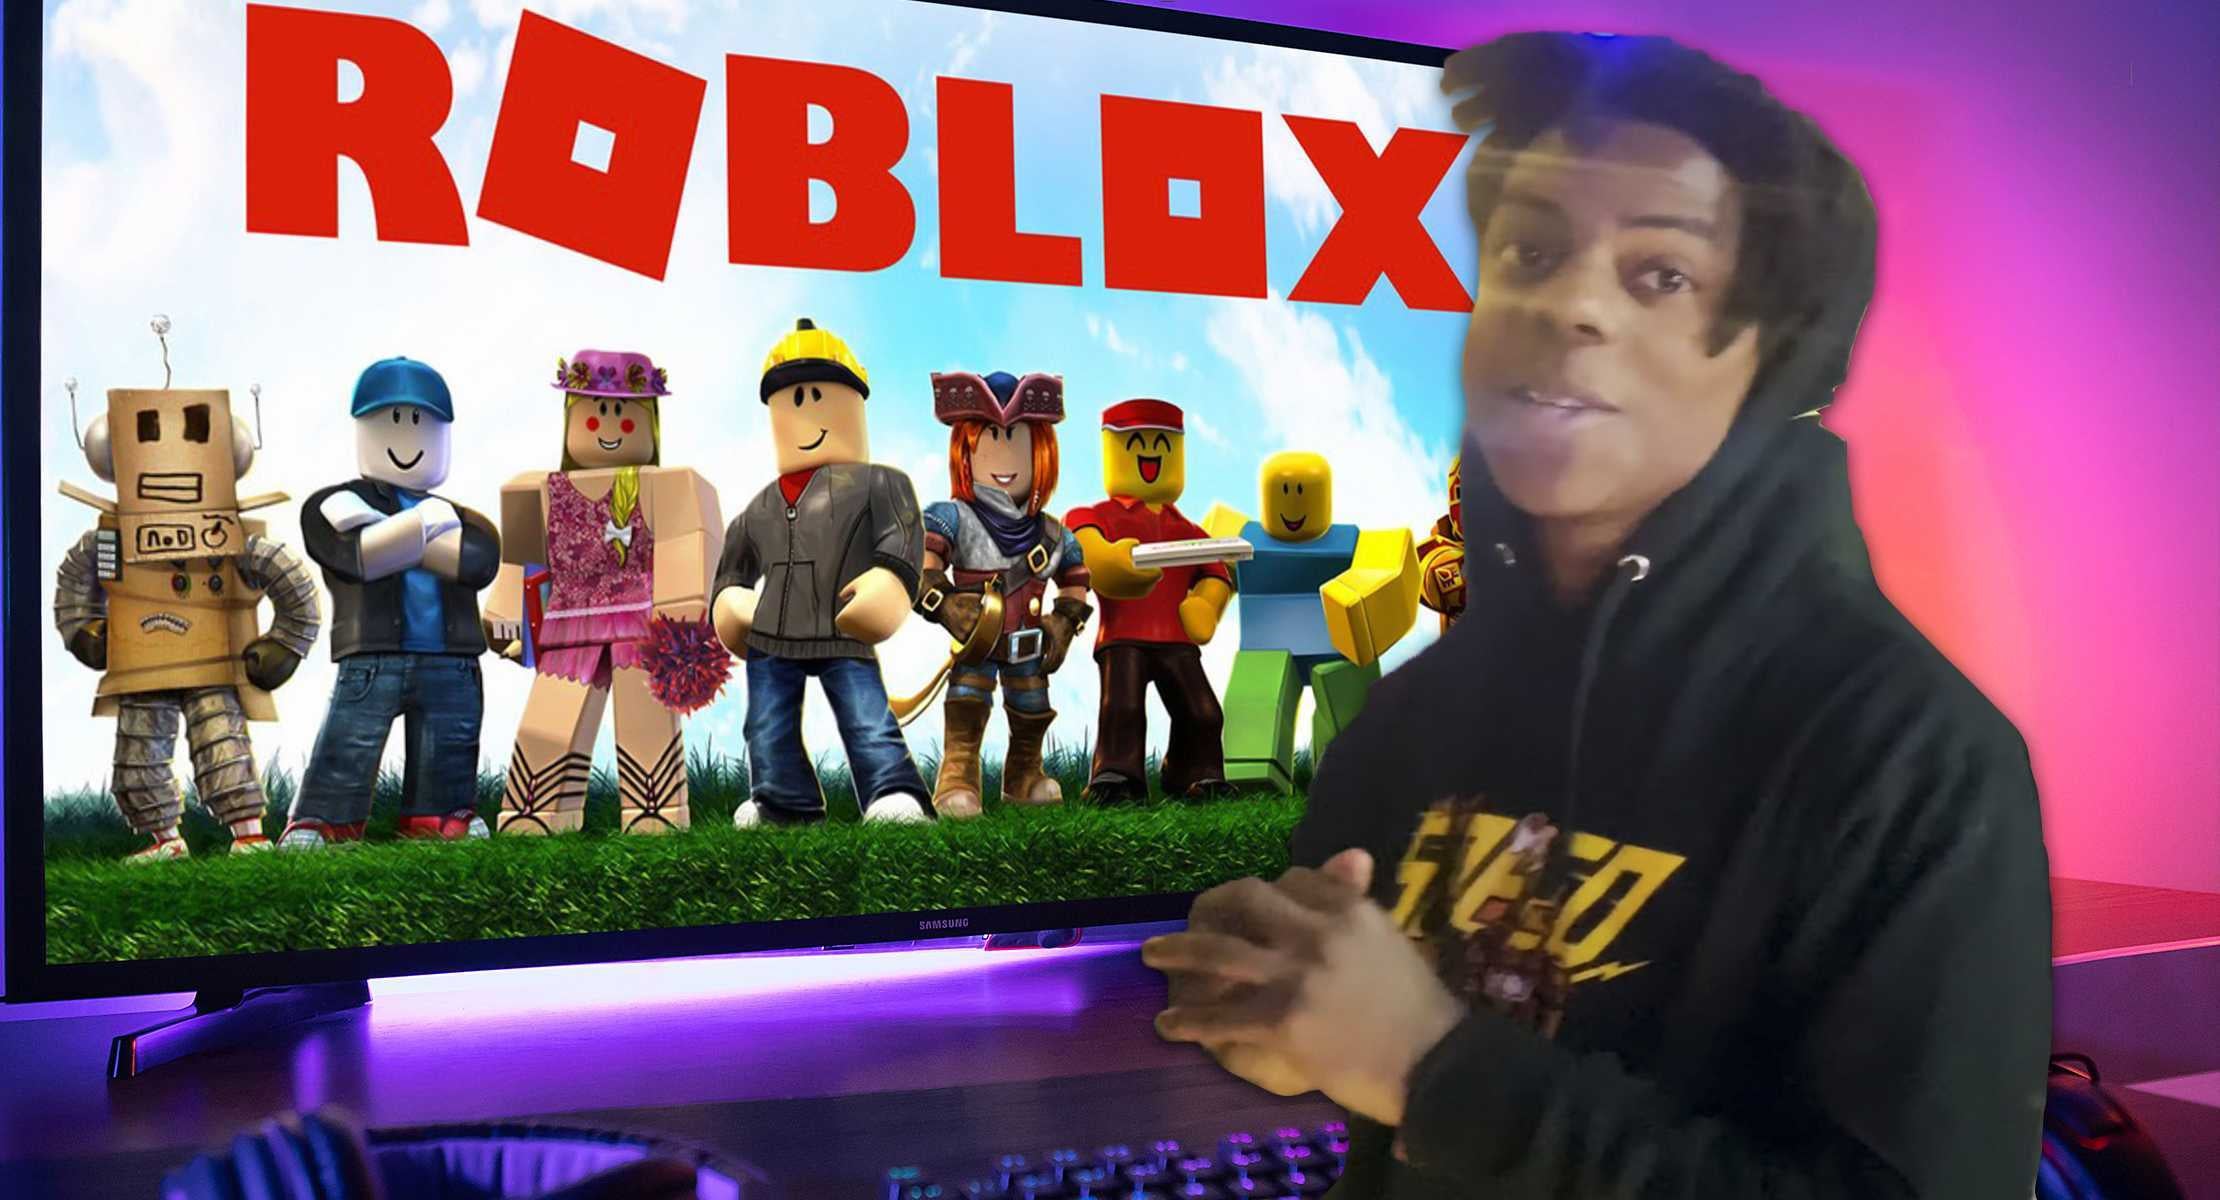 MAKING ISHOWSPEED a ROBLOX ACCOUNT 